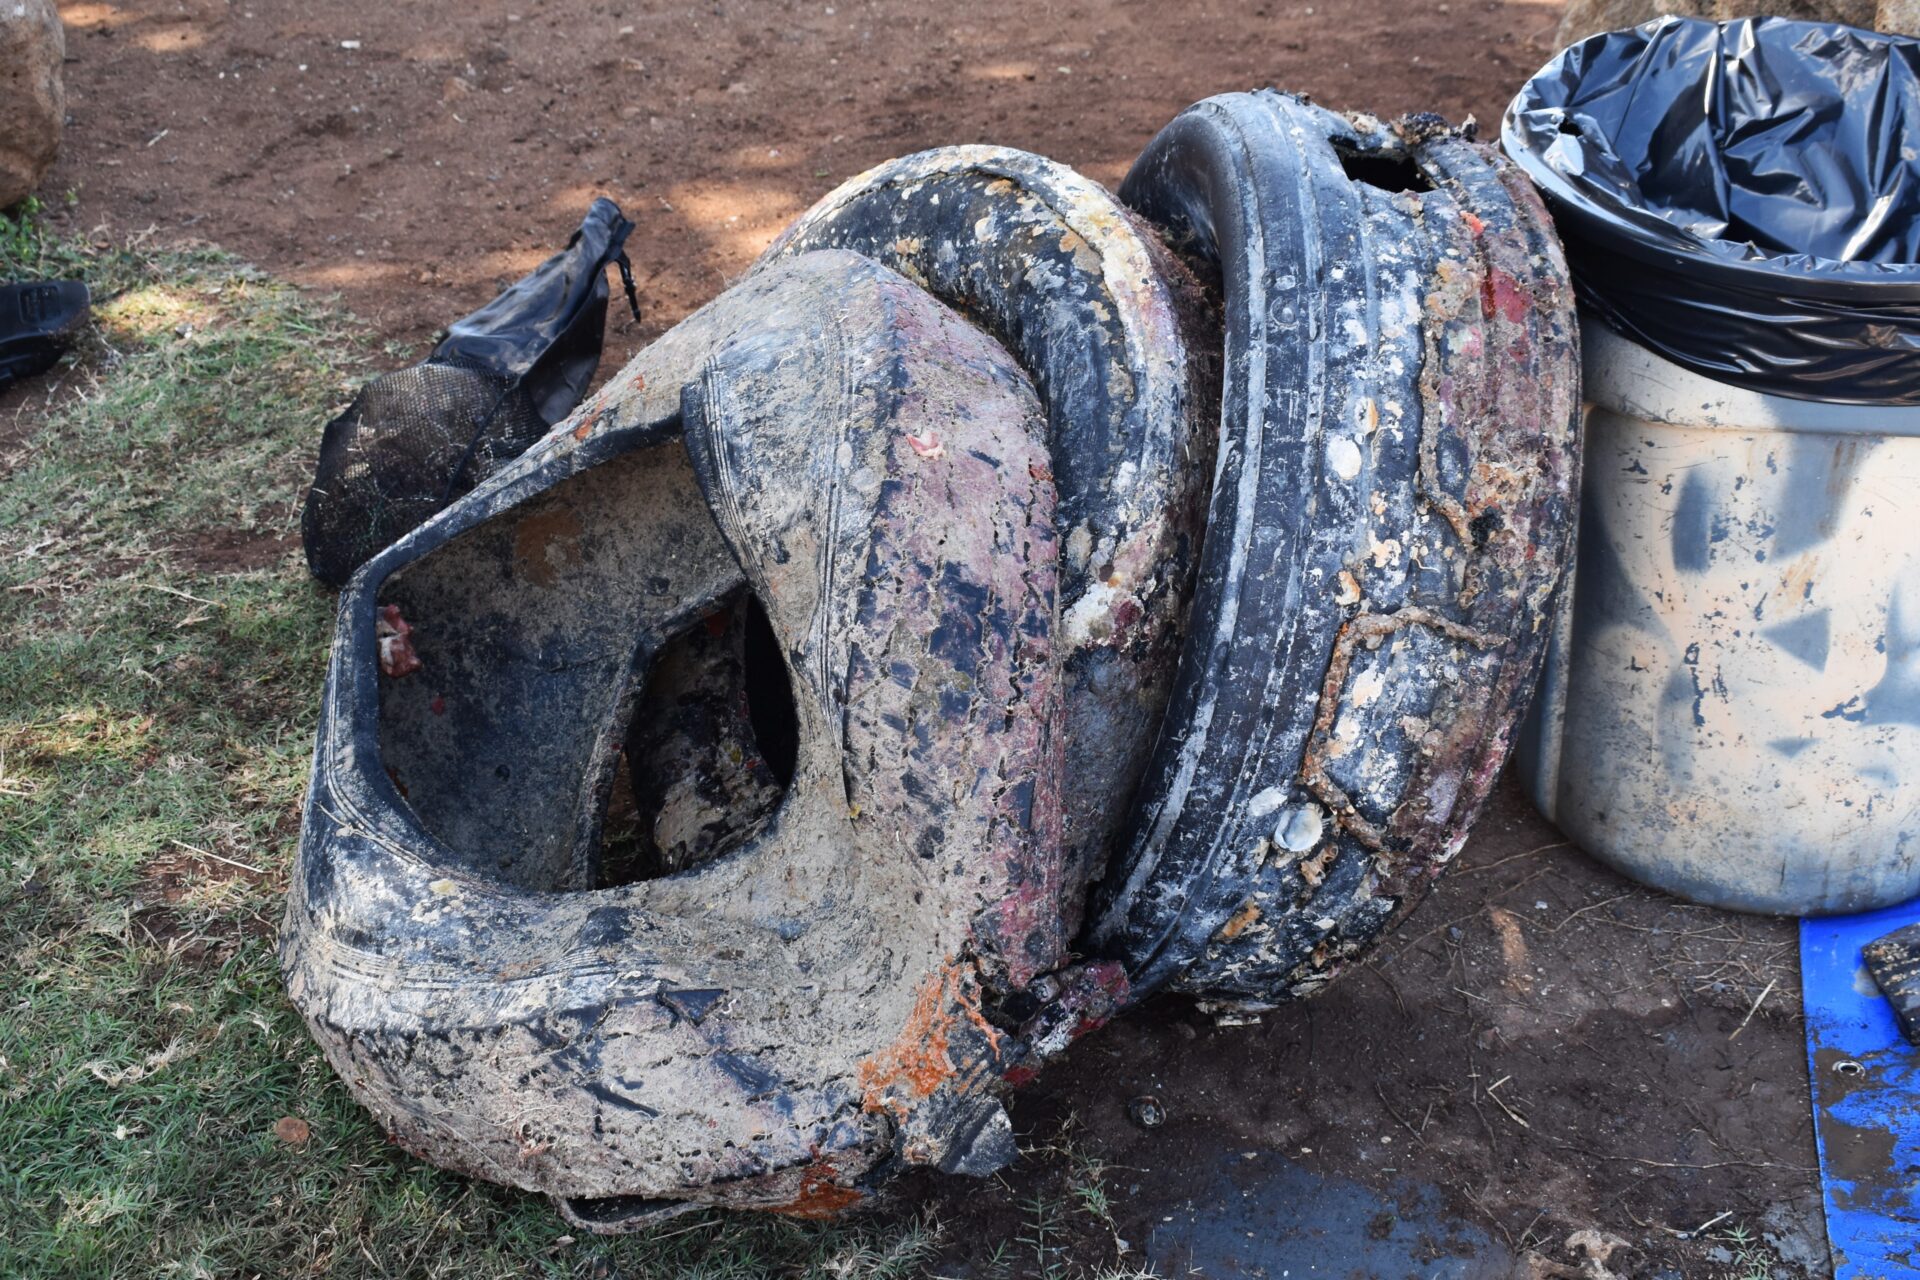 3 large car tires that were removed by Nudi Wear volunteers at Point Panic, a popular dive site on Oahu